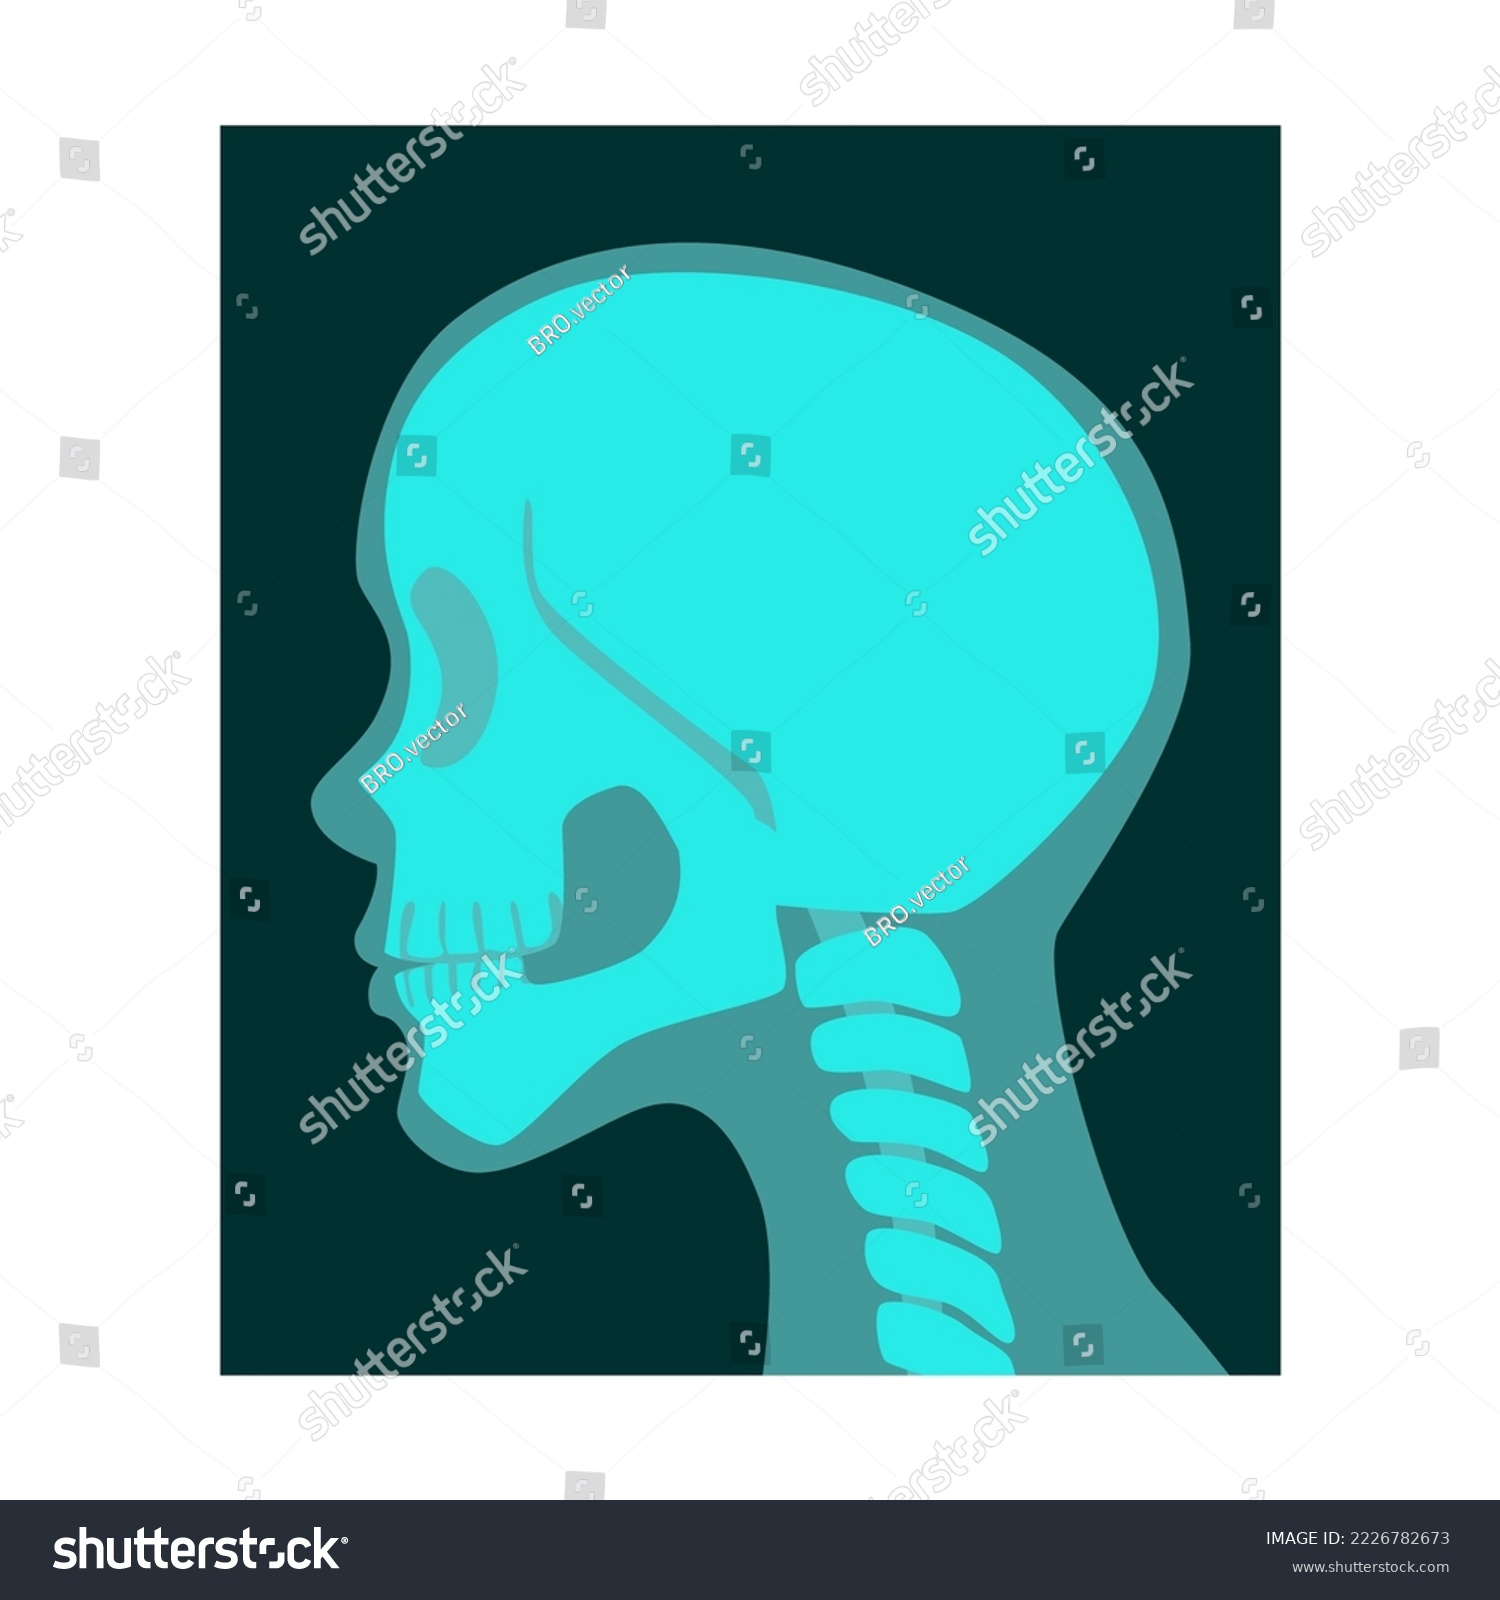 Ray Of Human Skull Side View Vector Illustration Royalty Free Stock Vector 2226782673 6489